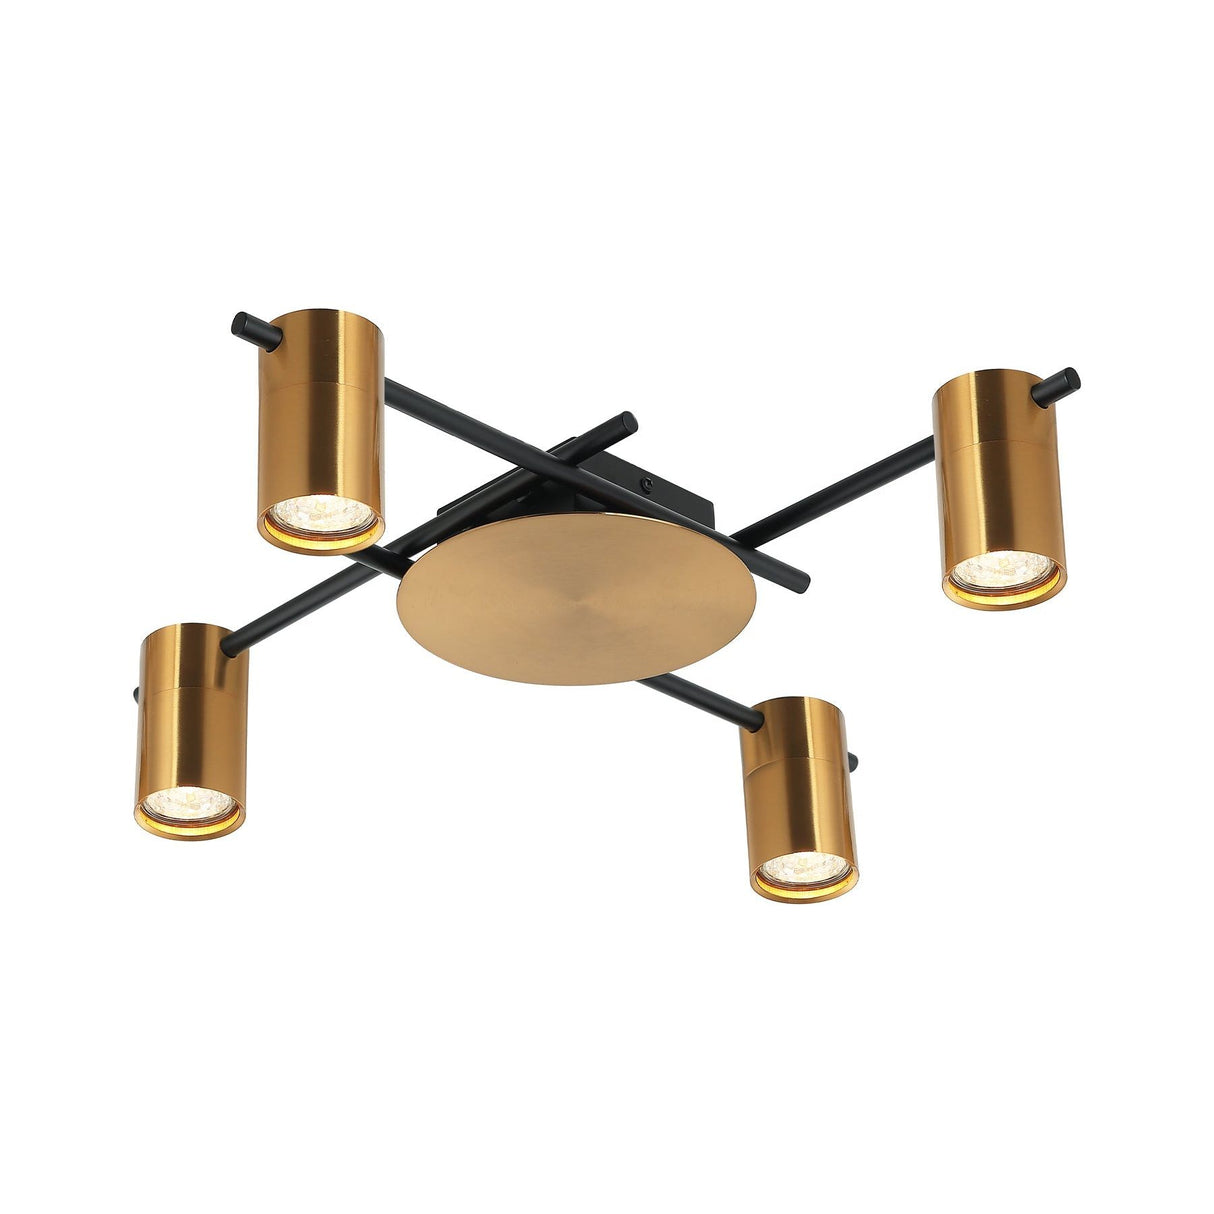 CLA TACHE Interior Spot Ceiling Lights with Adjustable Antique Brass Heads